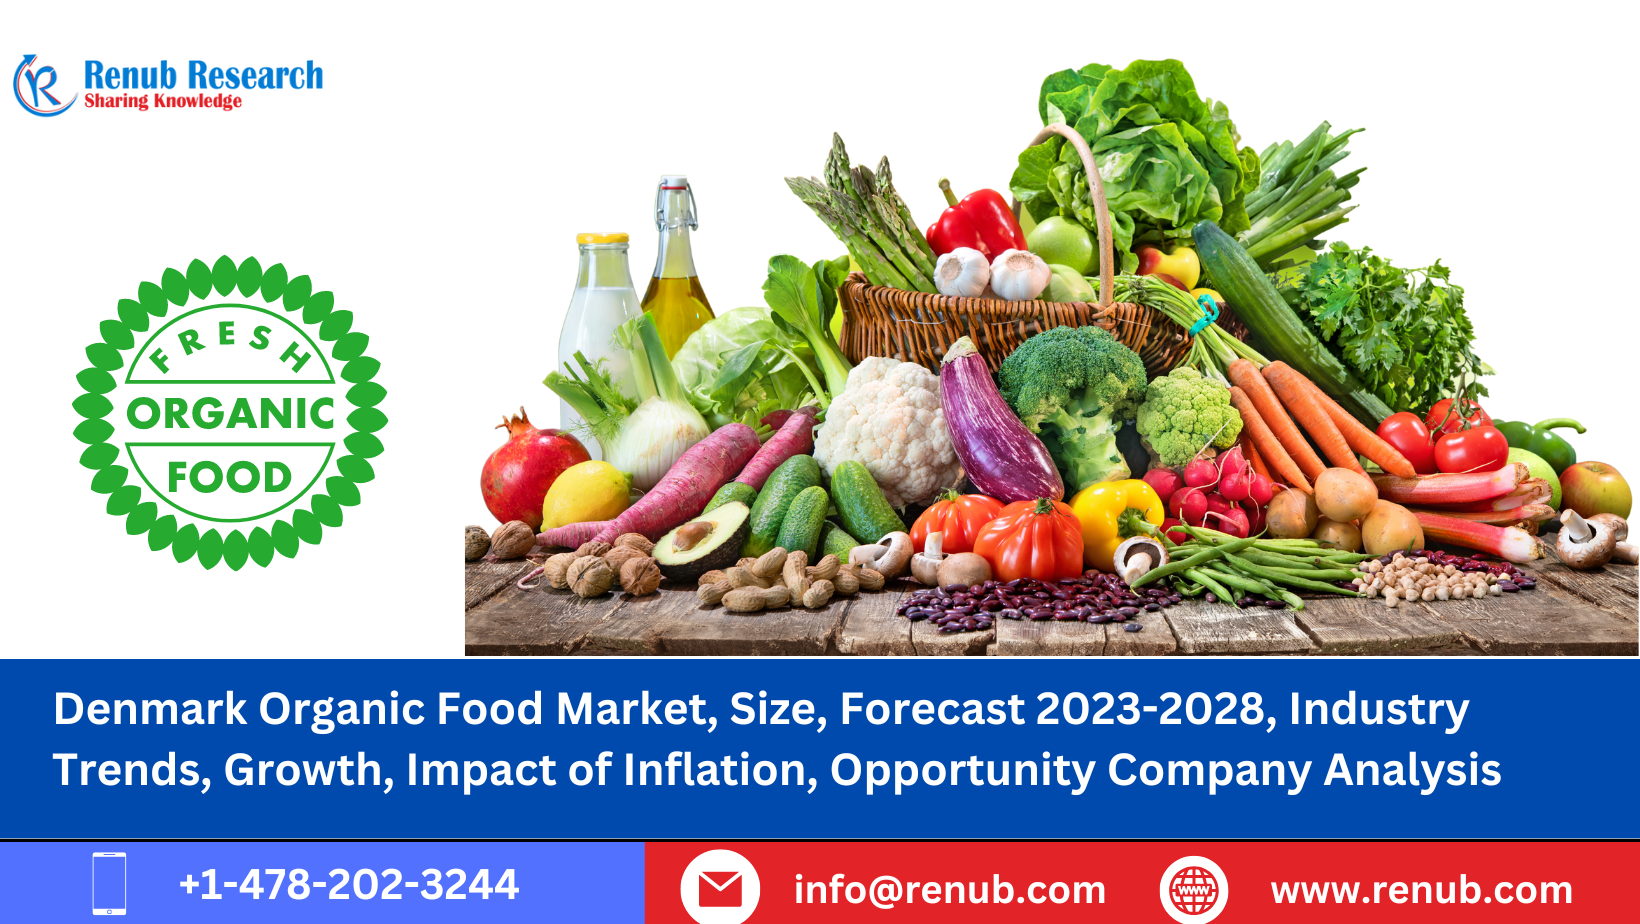 Denmark's Organic Food Market 2023: Trends, Challenges, and Opportunities 2028.